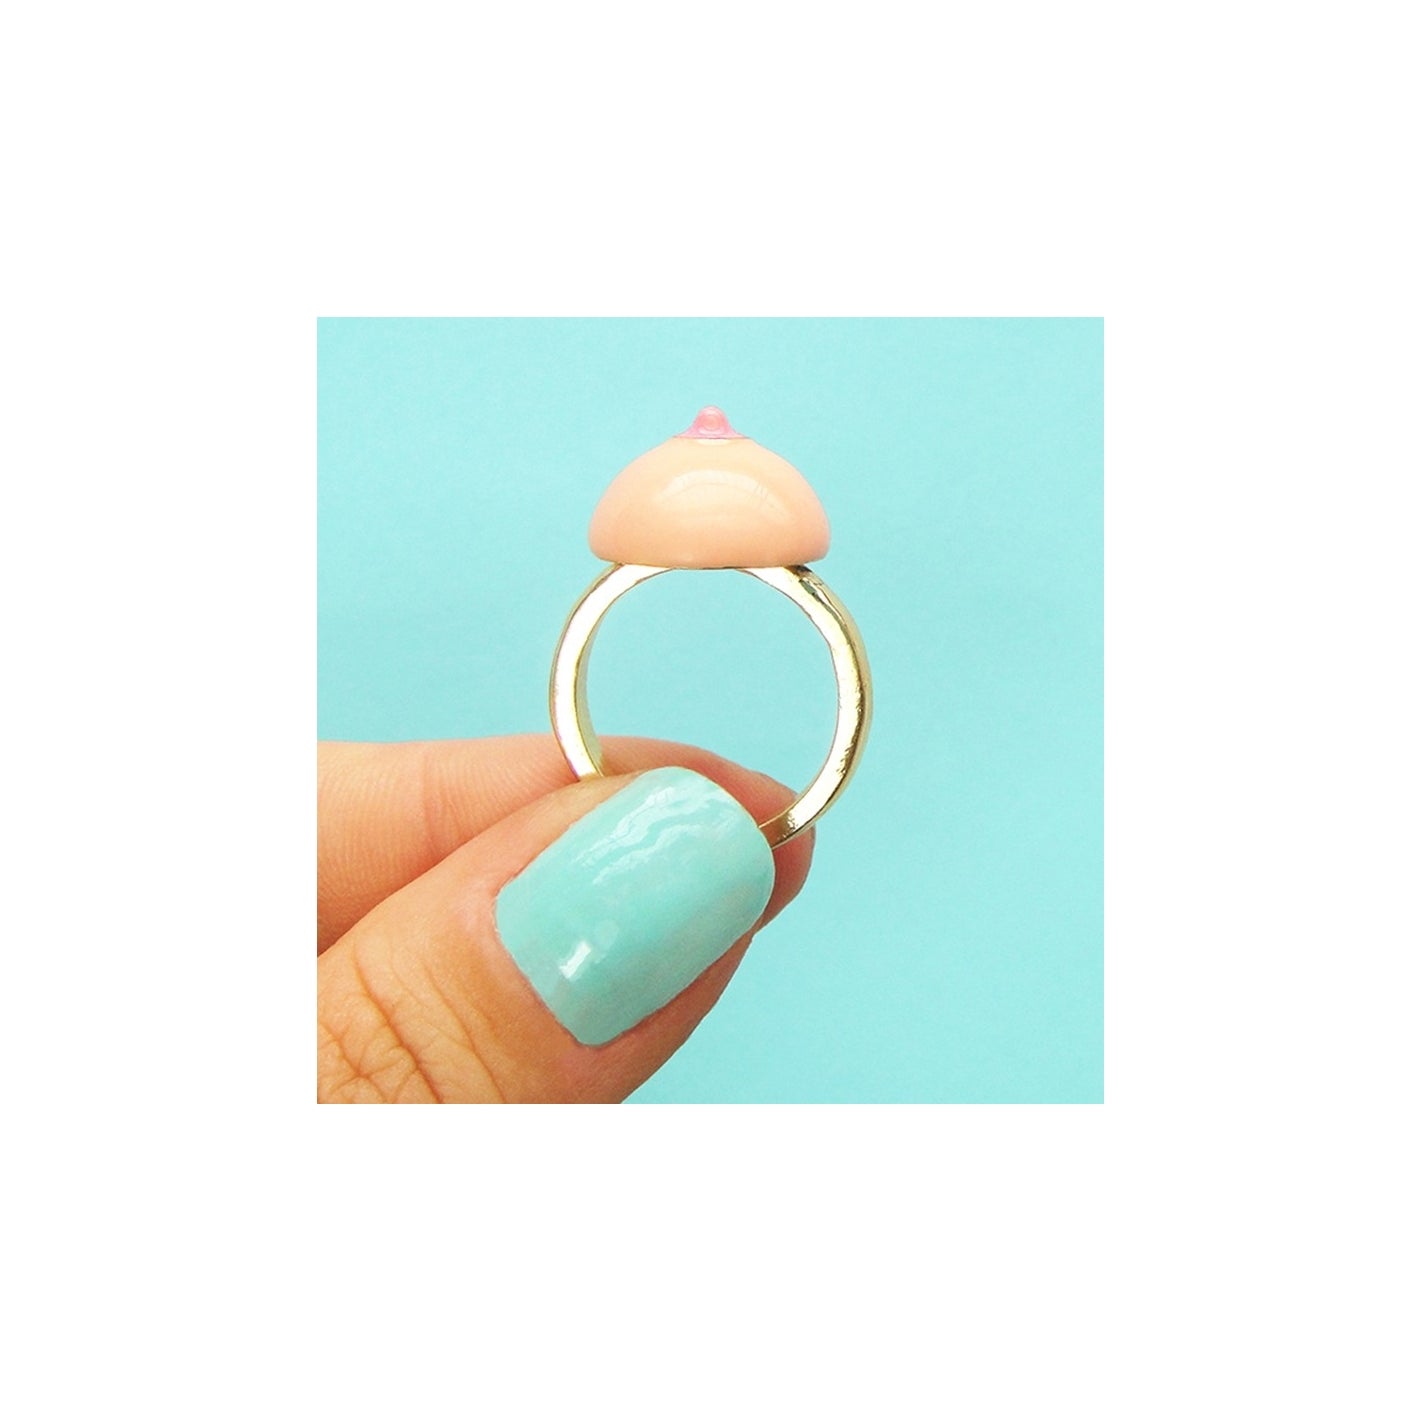 Cou Cou Suzette Boob Ring - one size - Filurfifi